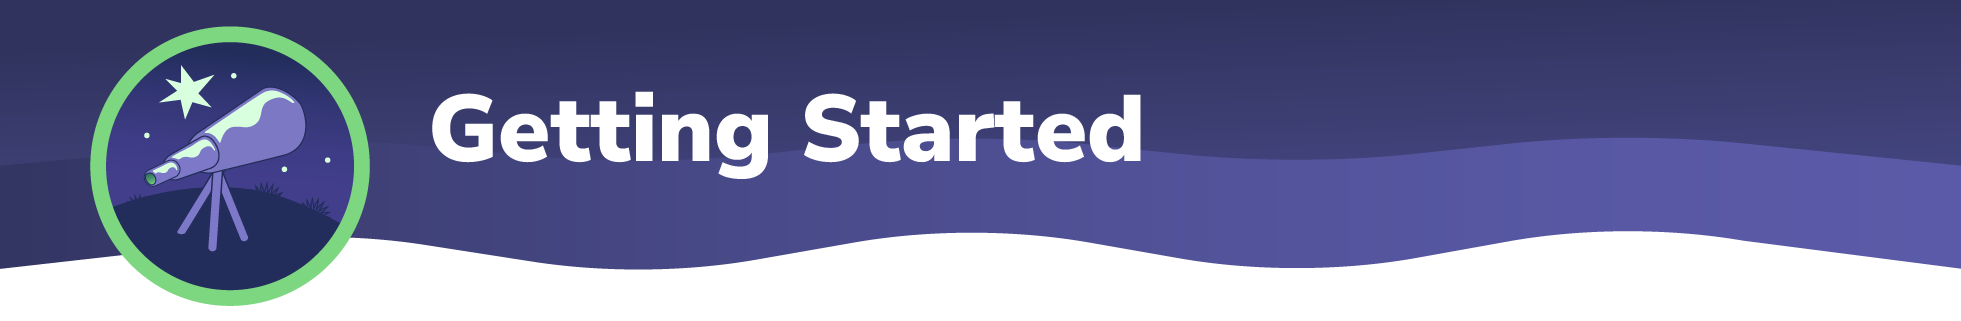 Getting Started banner